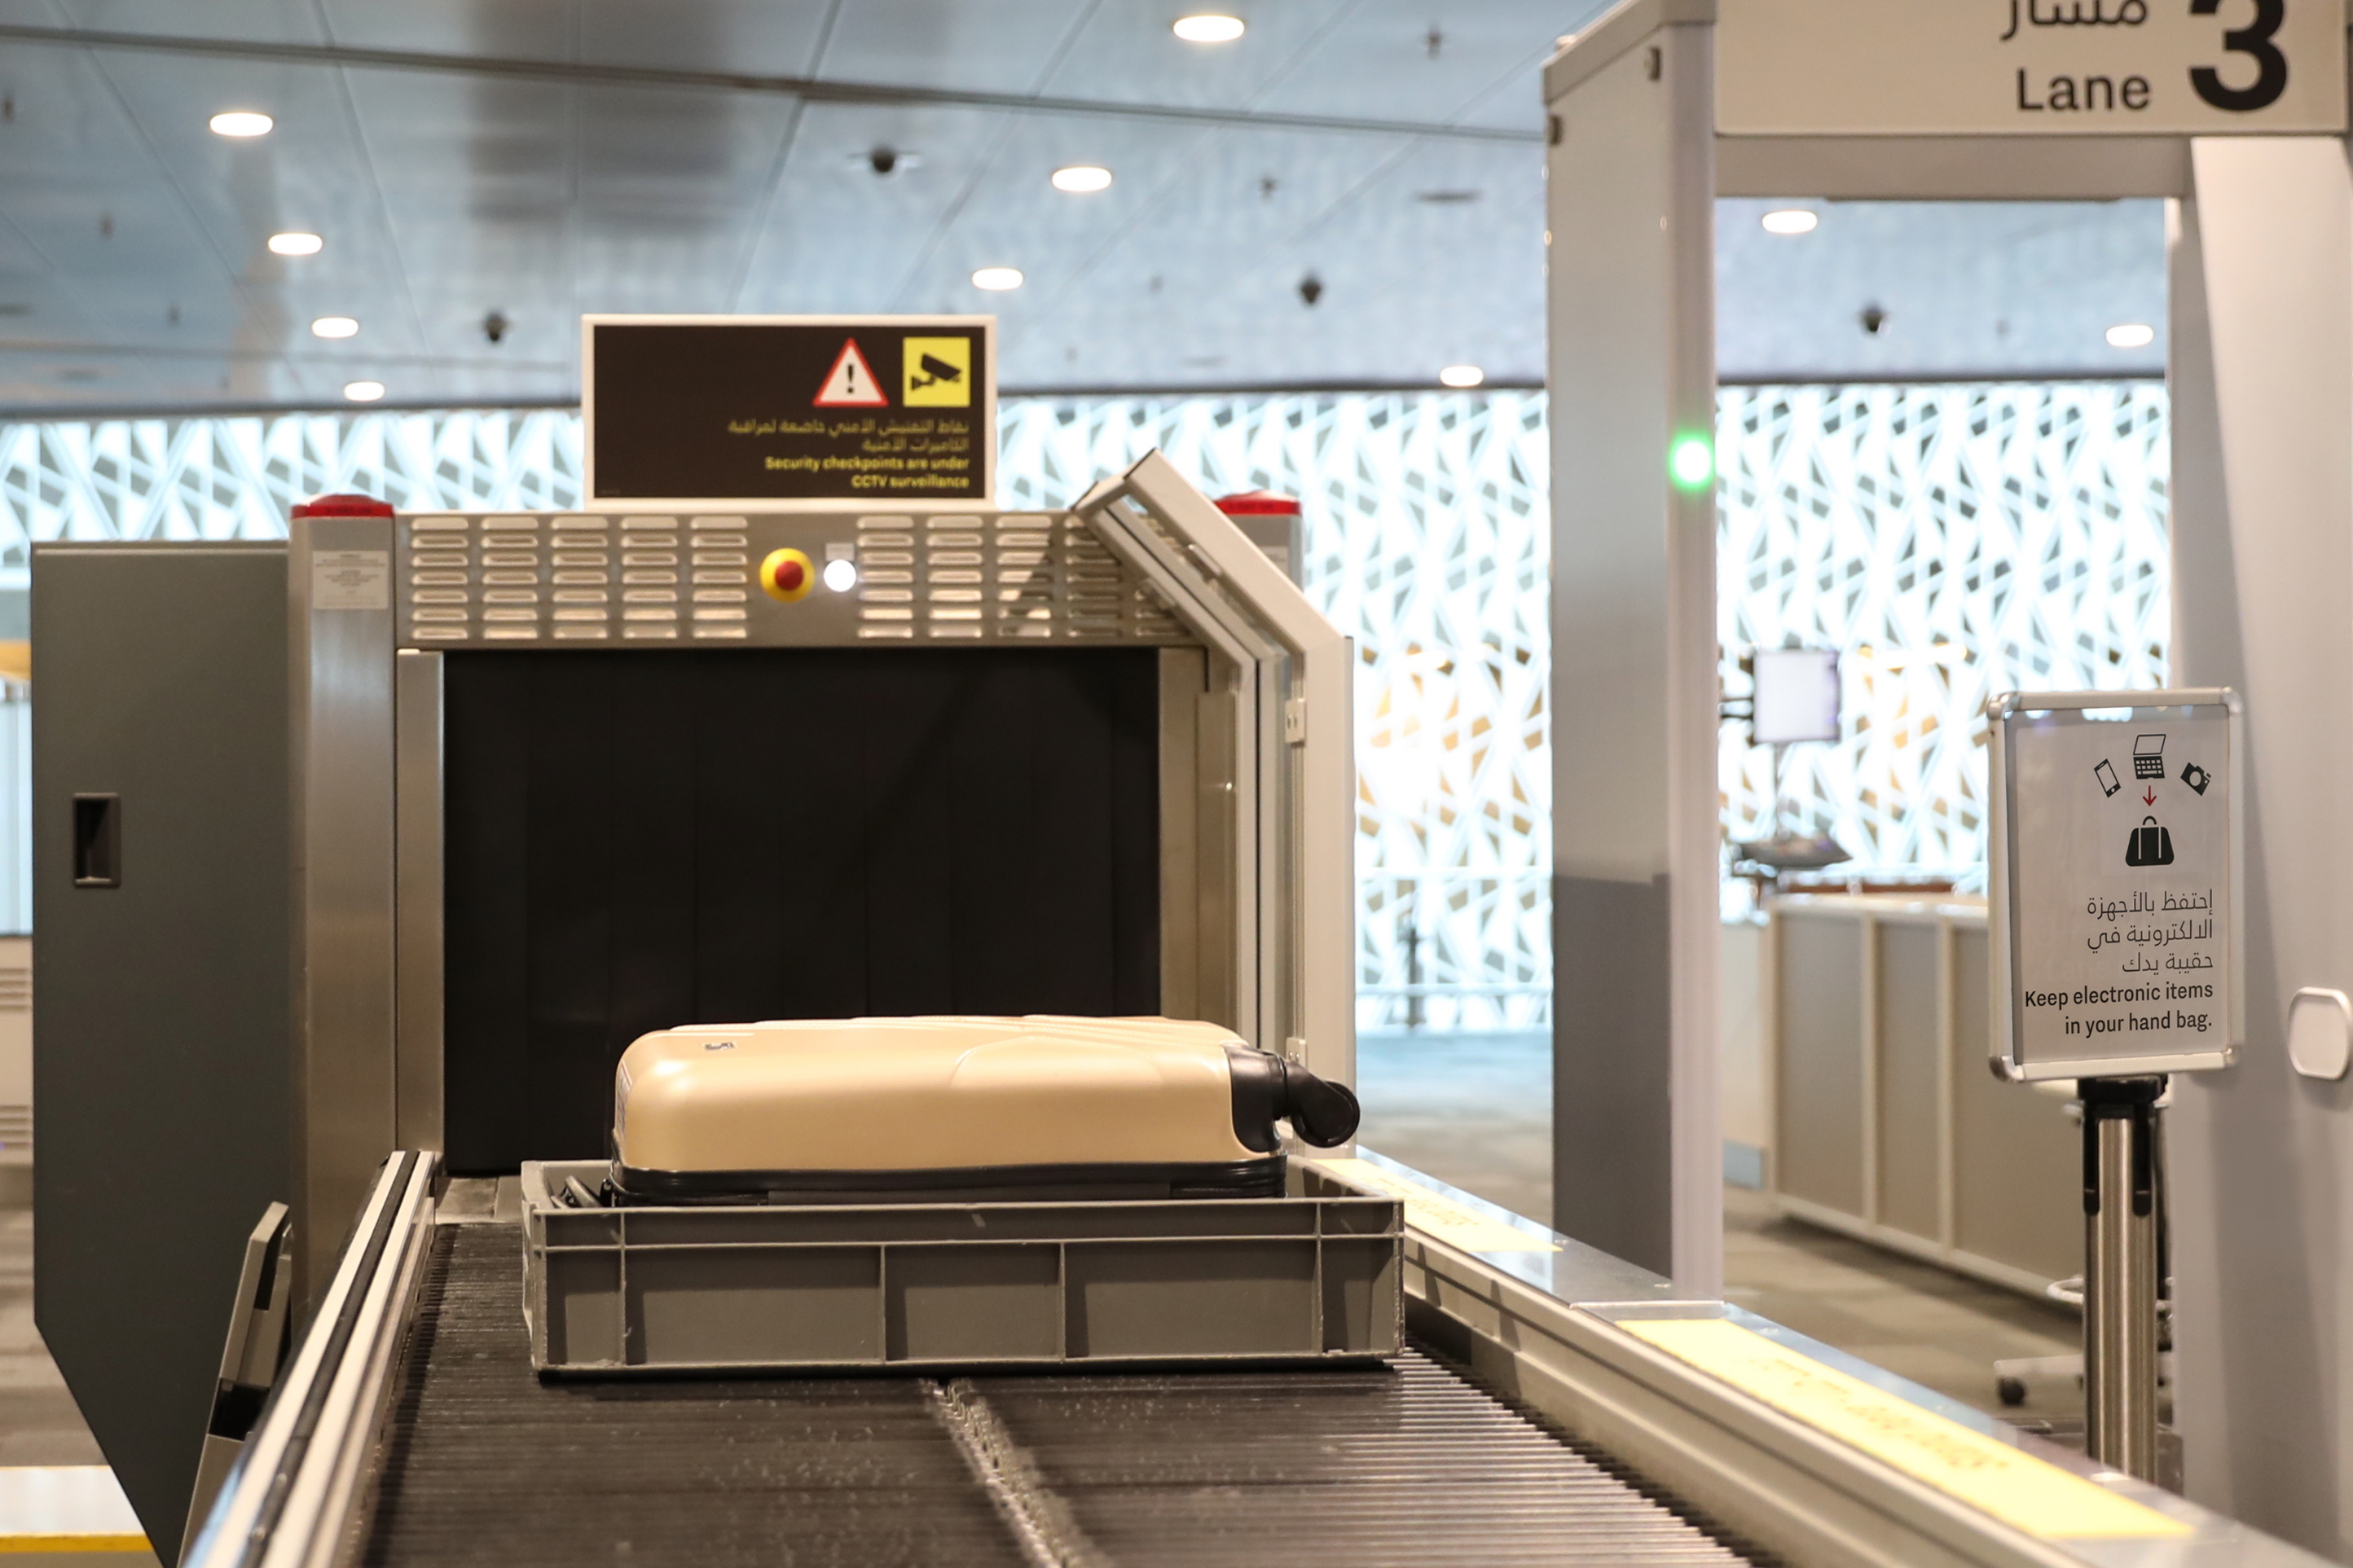 Hamad International Airport (HIA) in Qatar has installed Smiths Detection’s HI-SCAN 6040 CTiX, which offers advanced screening of carry-on baggage at security checkpoints. Click to enlarge.